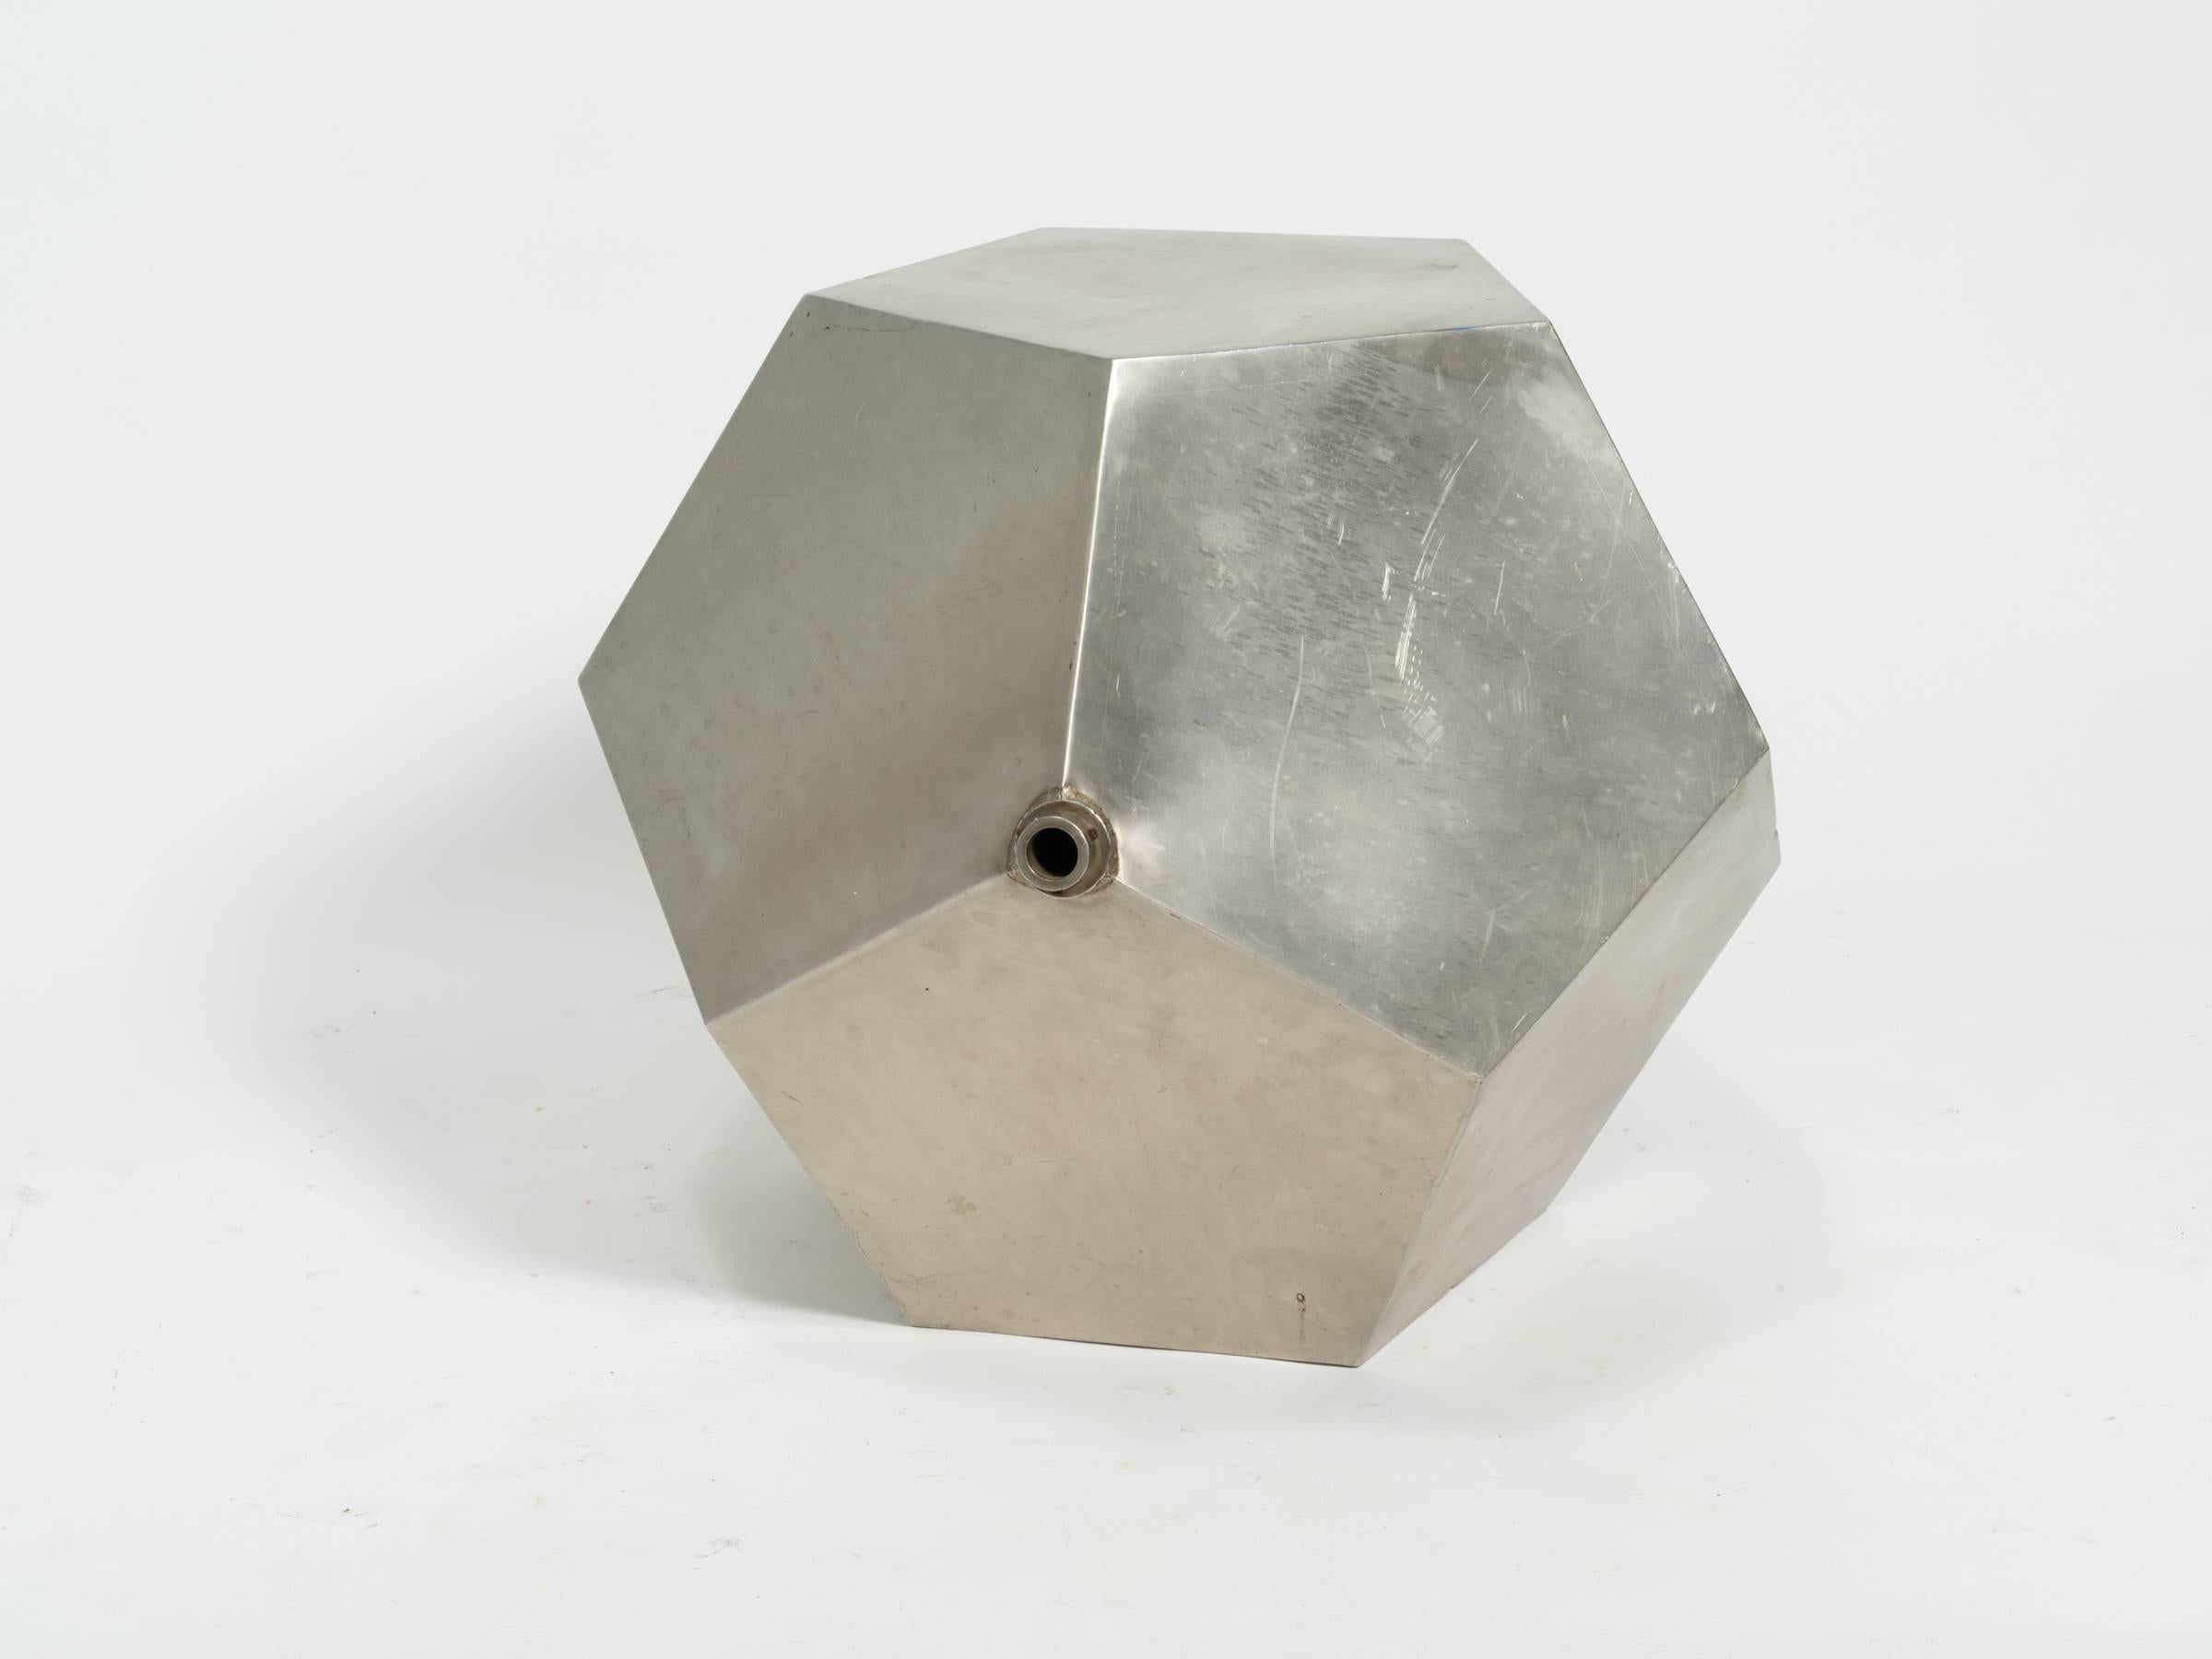 metal dodecahedron